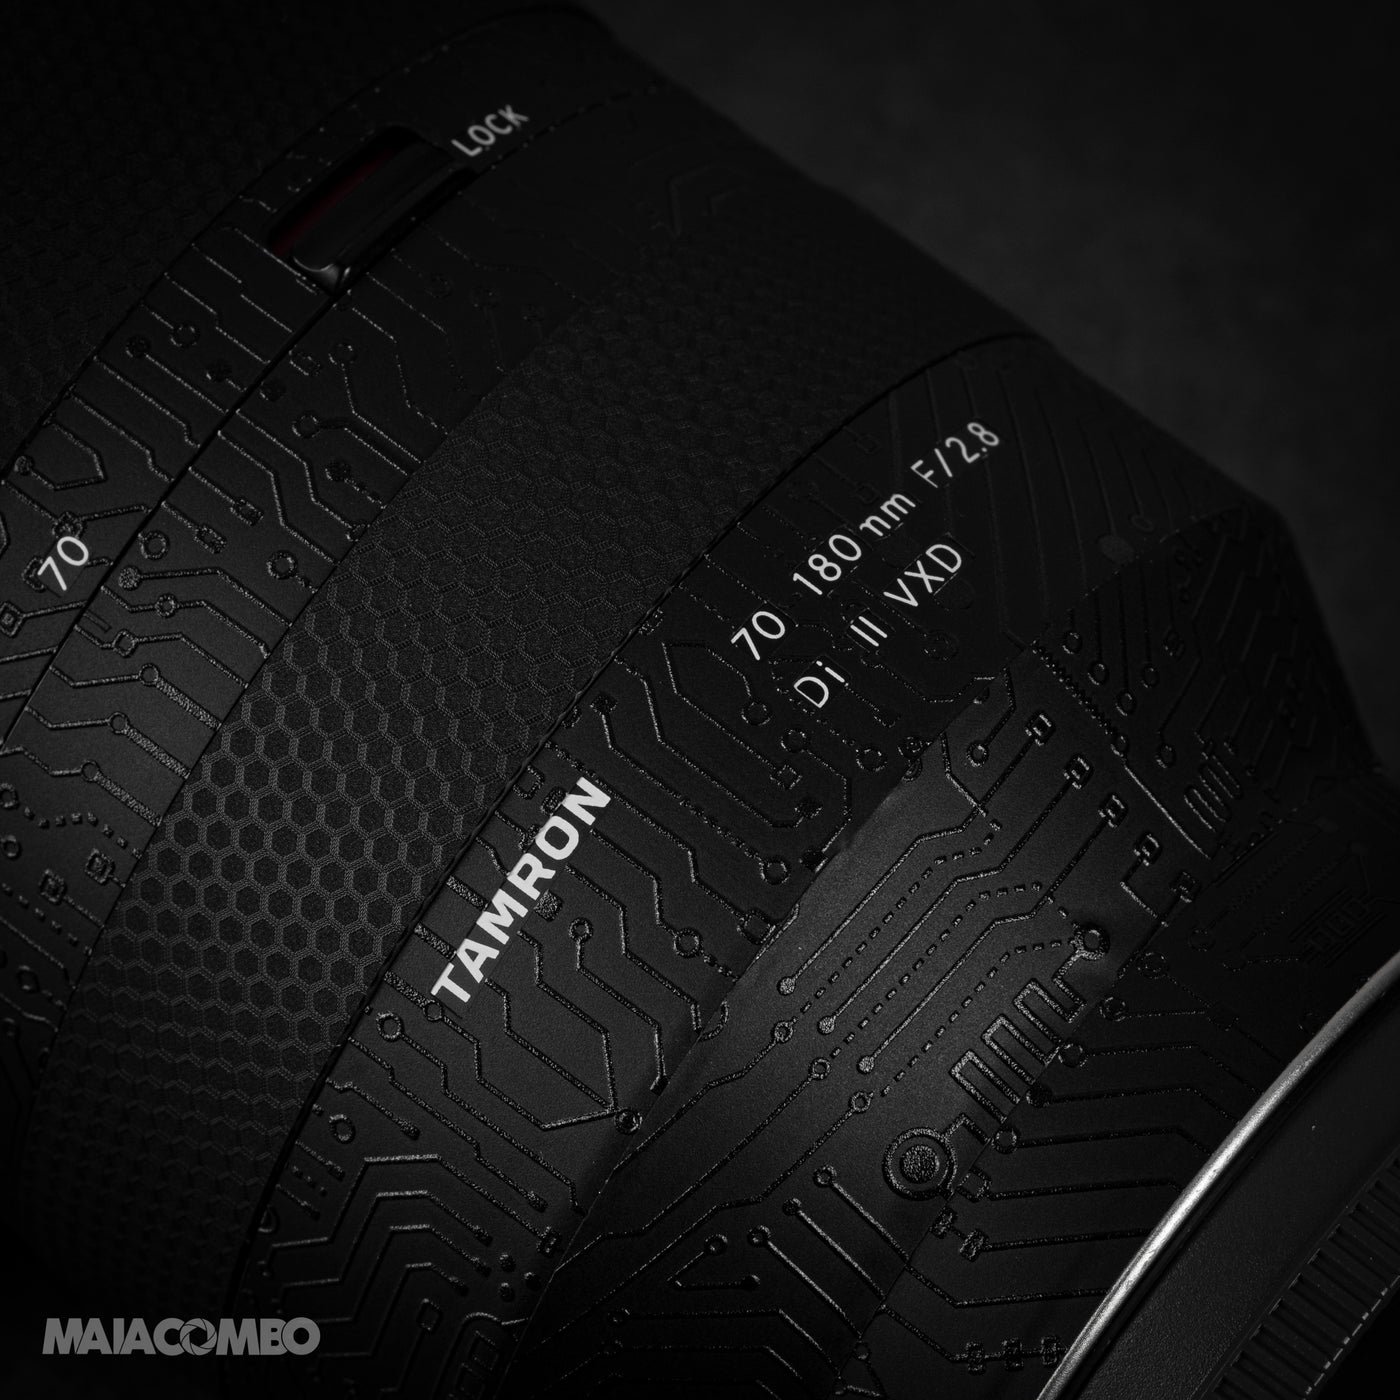 TAMRON 70-180mm F2.8 DiIII VXD (A056) Lens Skin For SONY